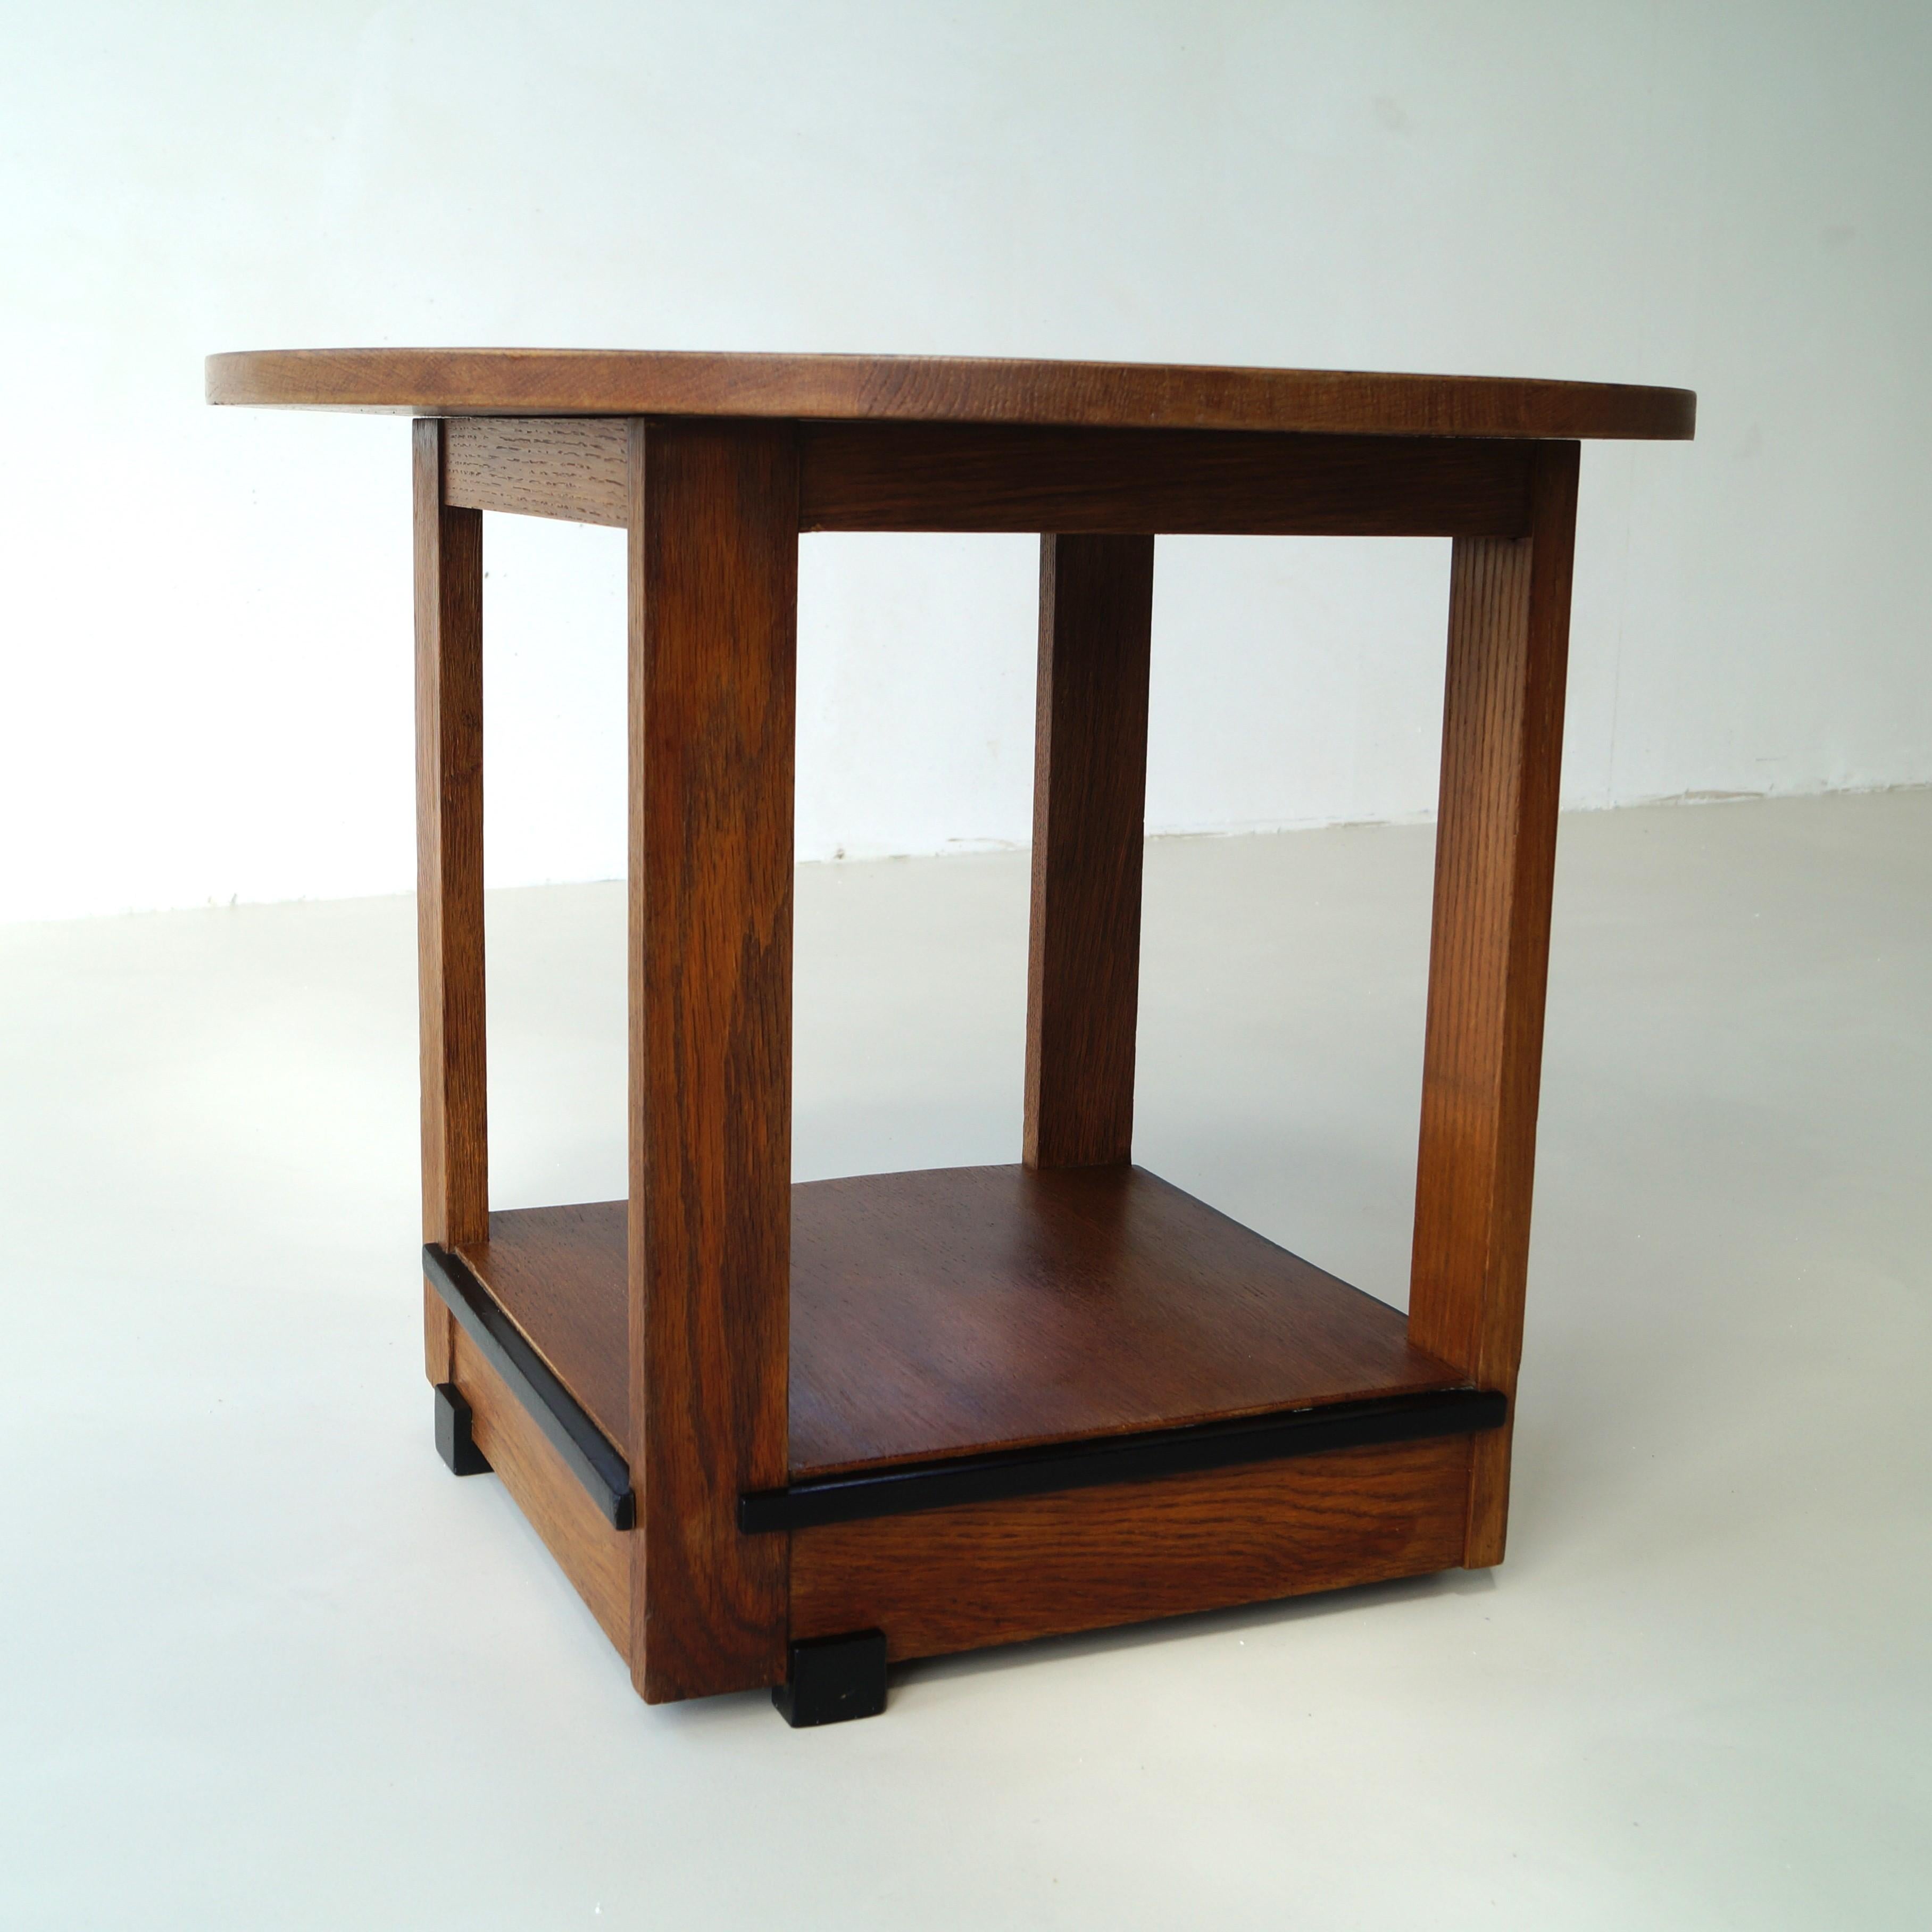 Modernist Dutch Art Deco occasional table attributed to Jan Brunott, 1920s For Sale 8